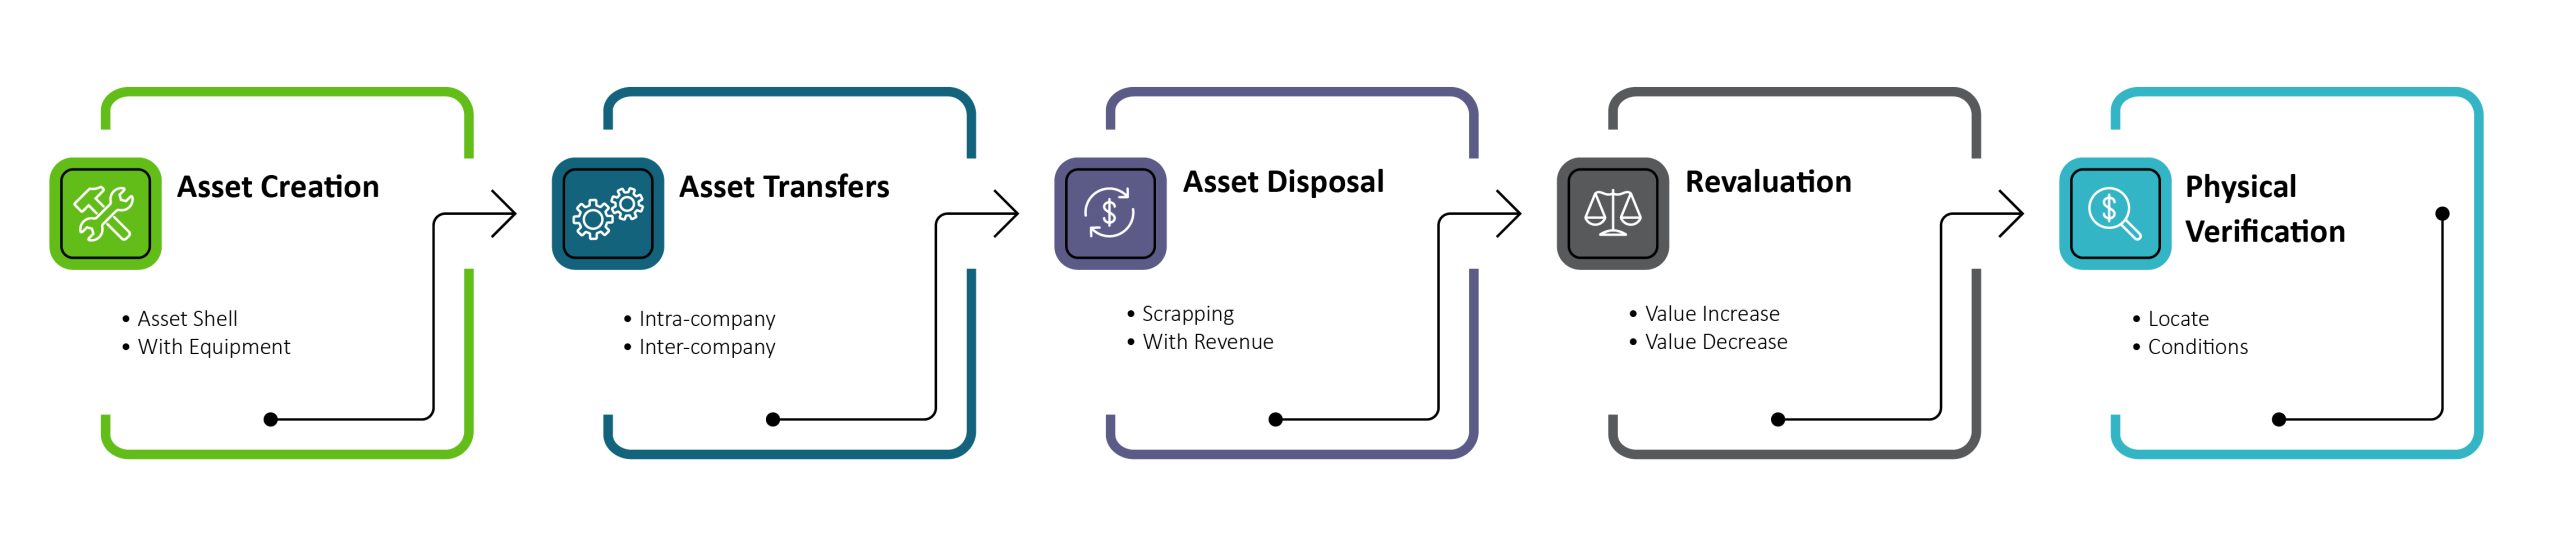 A Fixed Asset Management Diagram and Process Chart of the CAPEX process.